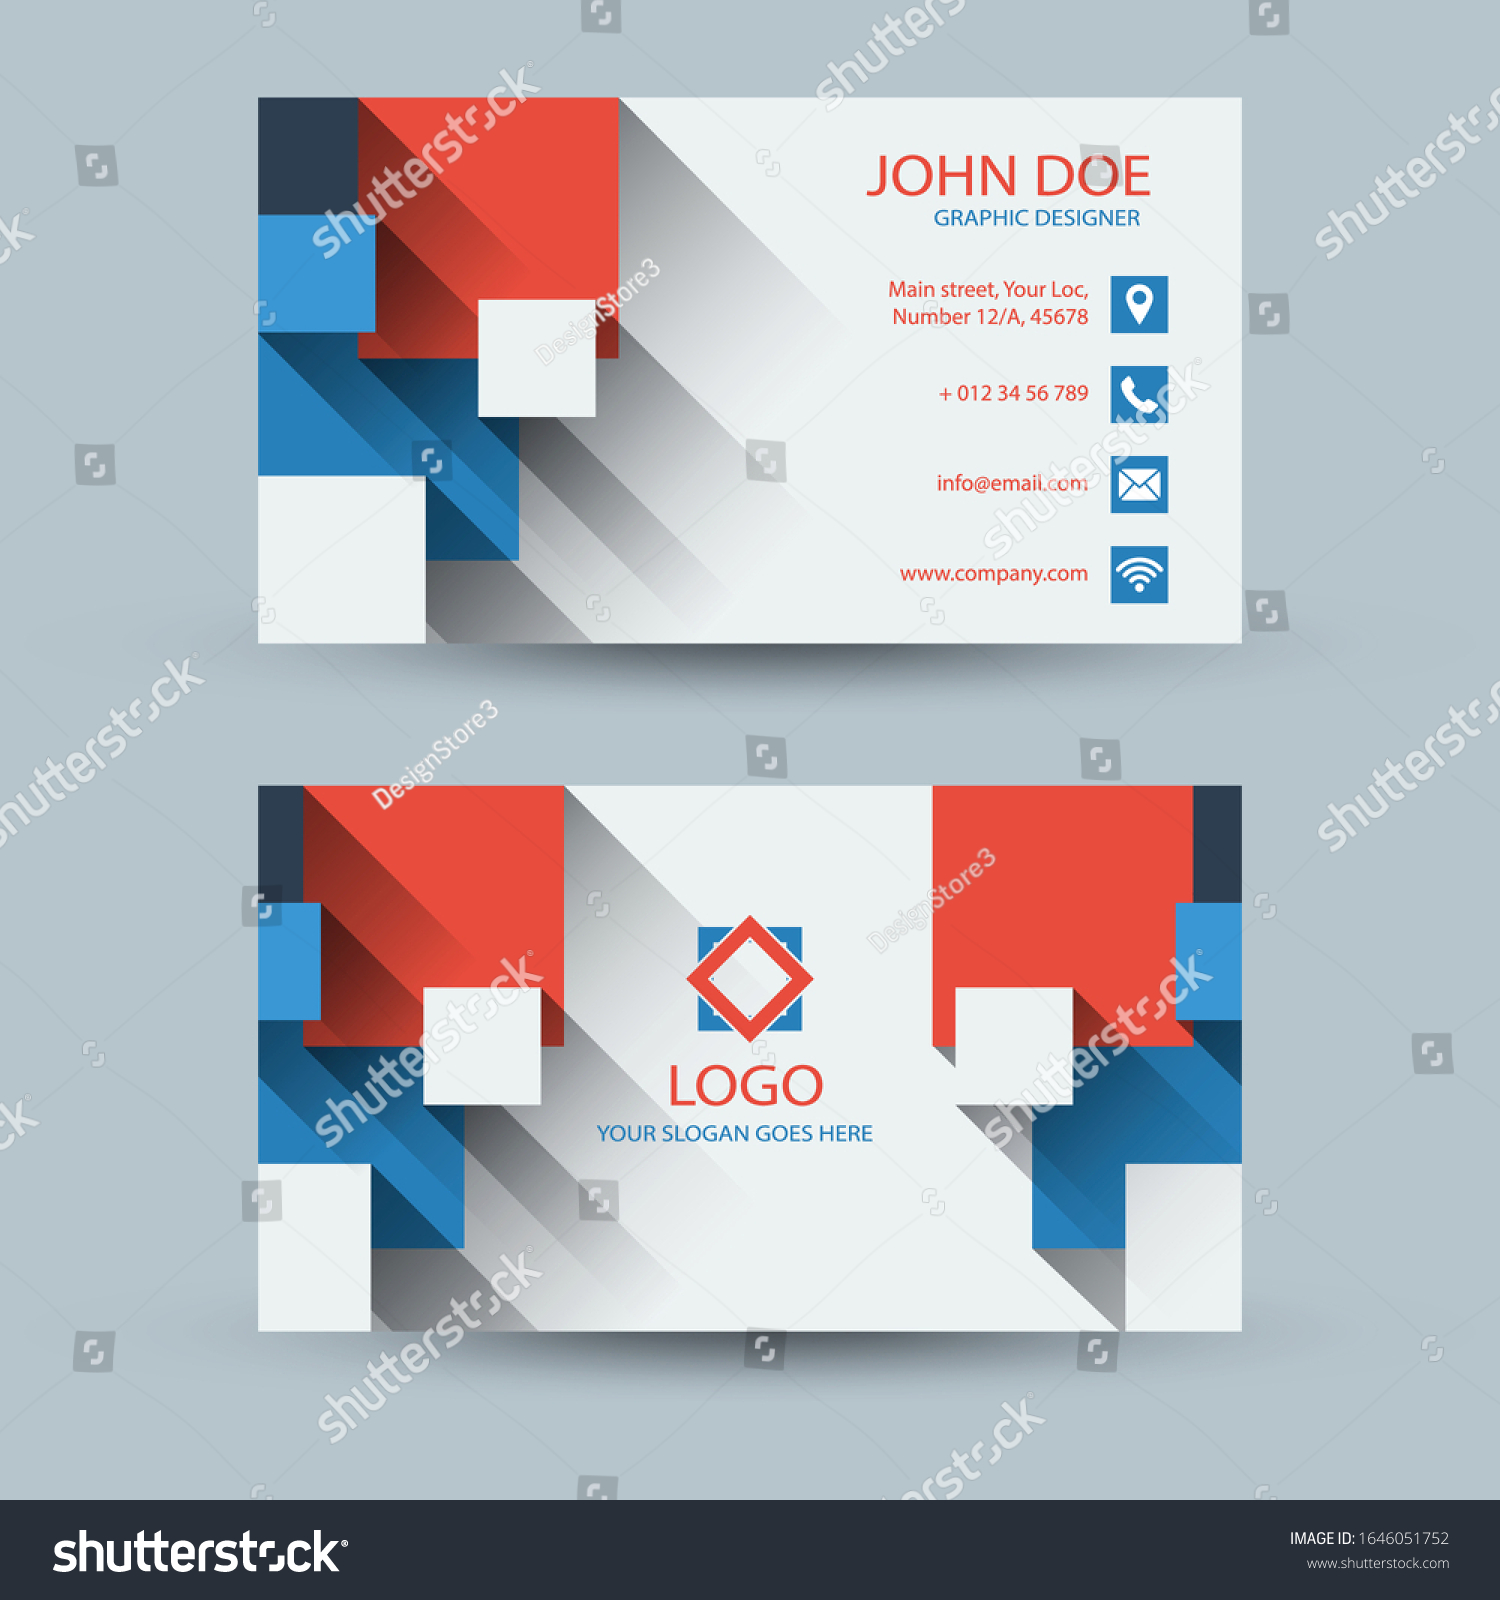 Call Cards Template from image.shutterstock.com